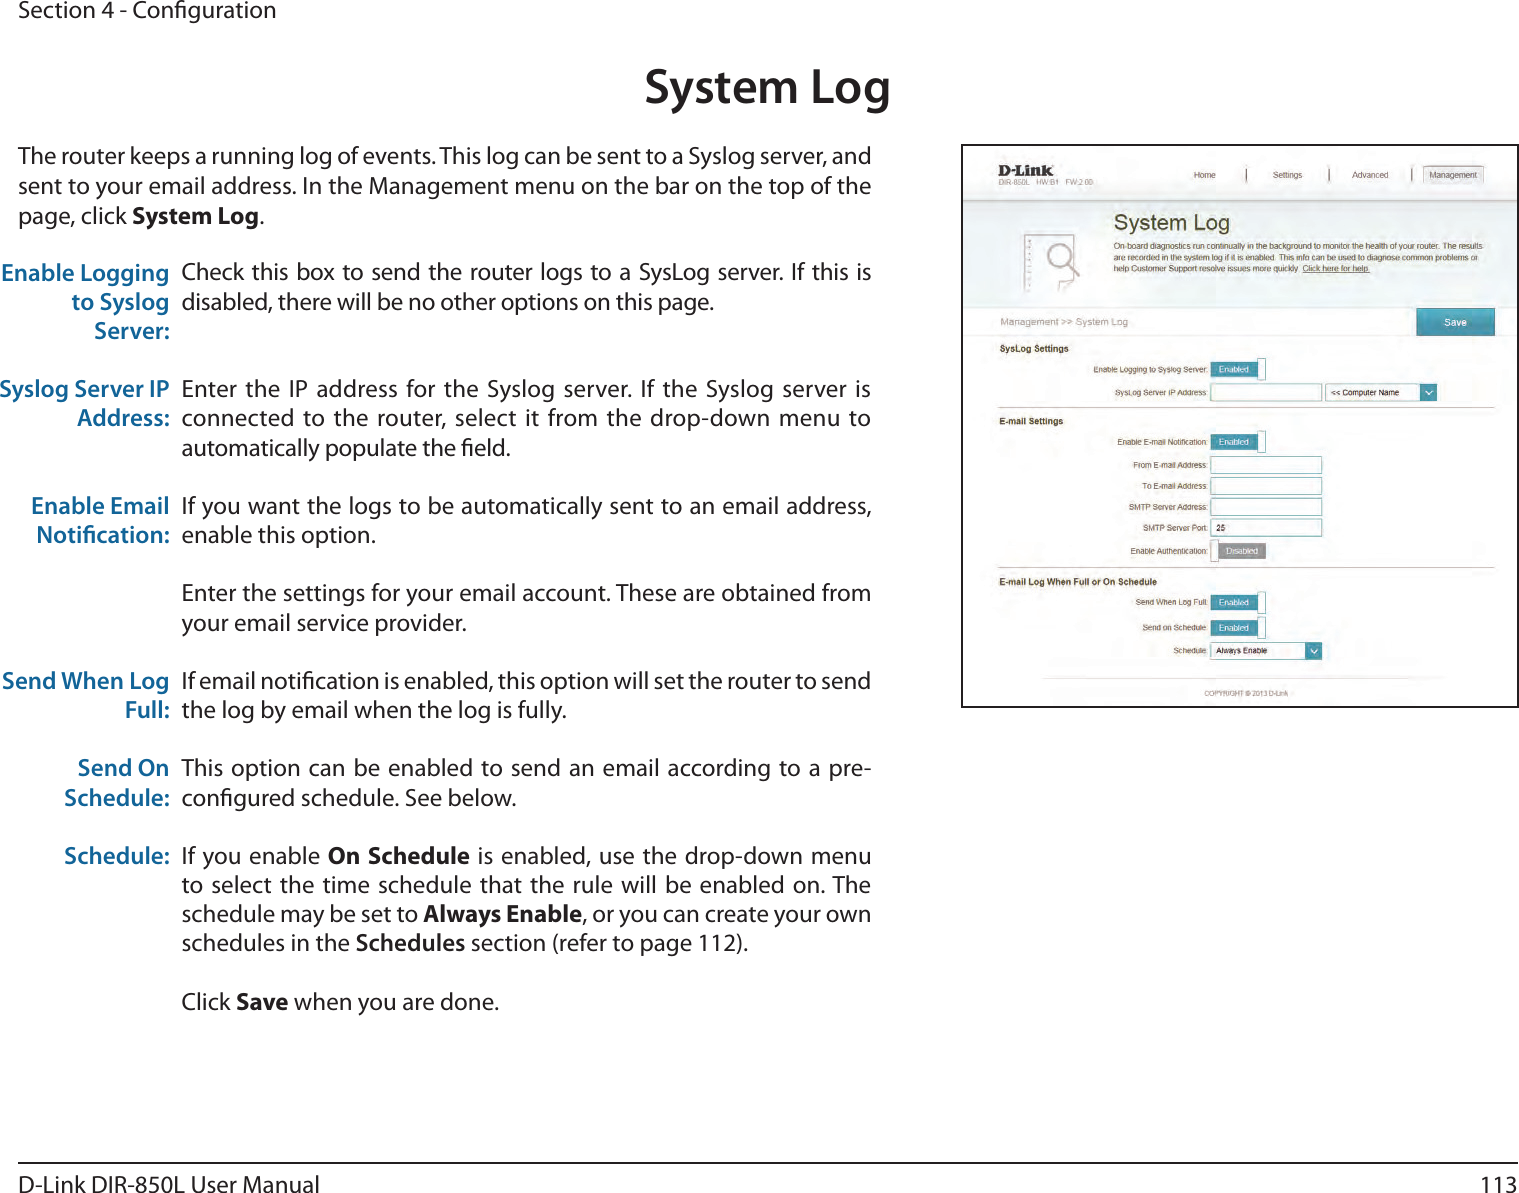 113D-Link DIR-850L User ManualSection 4 - CongurationSystem LogCheck this box to send the router logs to a SysLog server. If this is disabled, there will be no other options on this page.Enter the IP address for the Syslog server. If the Syslog server is connected to the router, select it from the drop-down menu to automatically populate the eld. If you want the logs to be automatically sent to an email address, enable this option.Enter the settings for your email account. These are obtained from your email service provider.If email notication is enabled, this option will set the router to send the log by email when the log is fully.This option can be enabled to send an email according to a pre-congured schedule. See below.If you enable On Schedule is enabled, use the drop-down menu to select the time schedule that the rule will be enabled on. The schedule may be set to Always Enable, or you can create your own schedules in the Schedules section (refer to page 112).Click Save when you are done.Enable Logging to Syslog Server:Syslog Server IP Address:Enable Email Notication:Send When Log Full:Send On Schedule:Schedule:The router keeps a running log of events. This log can be sent to a Syslog server, and sent to your email address. In the Management menu on the bar on the top of the page, click System Log. 